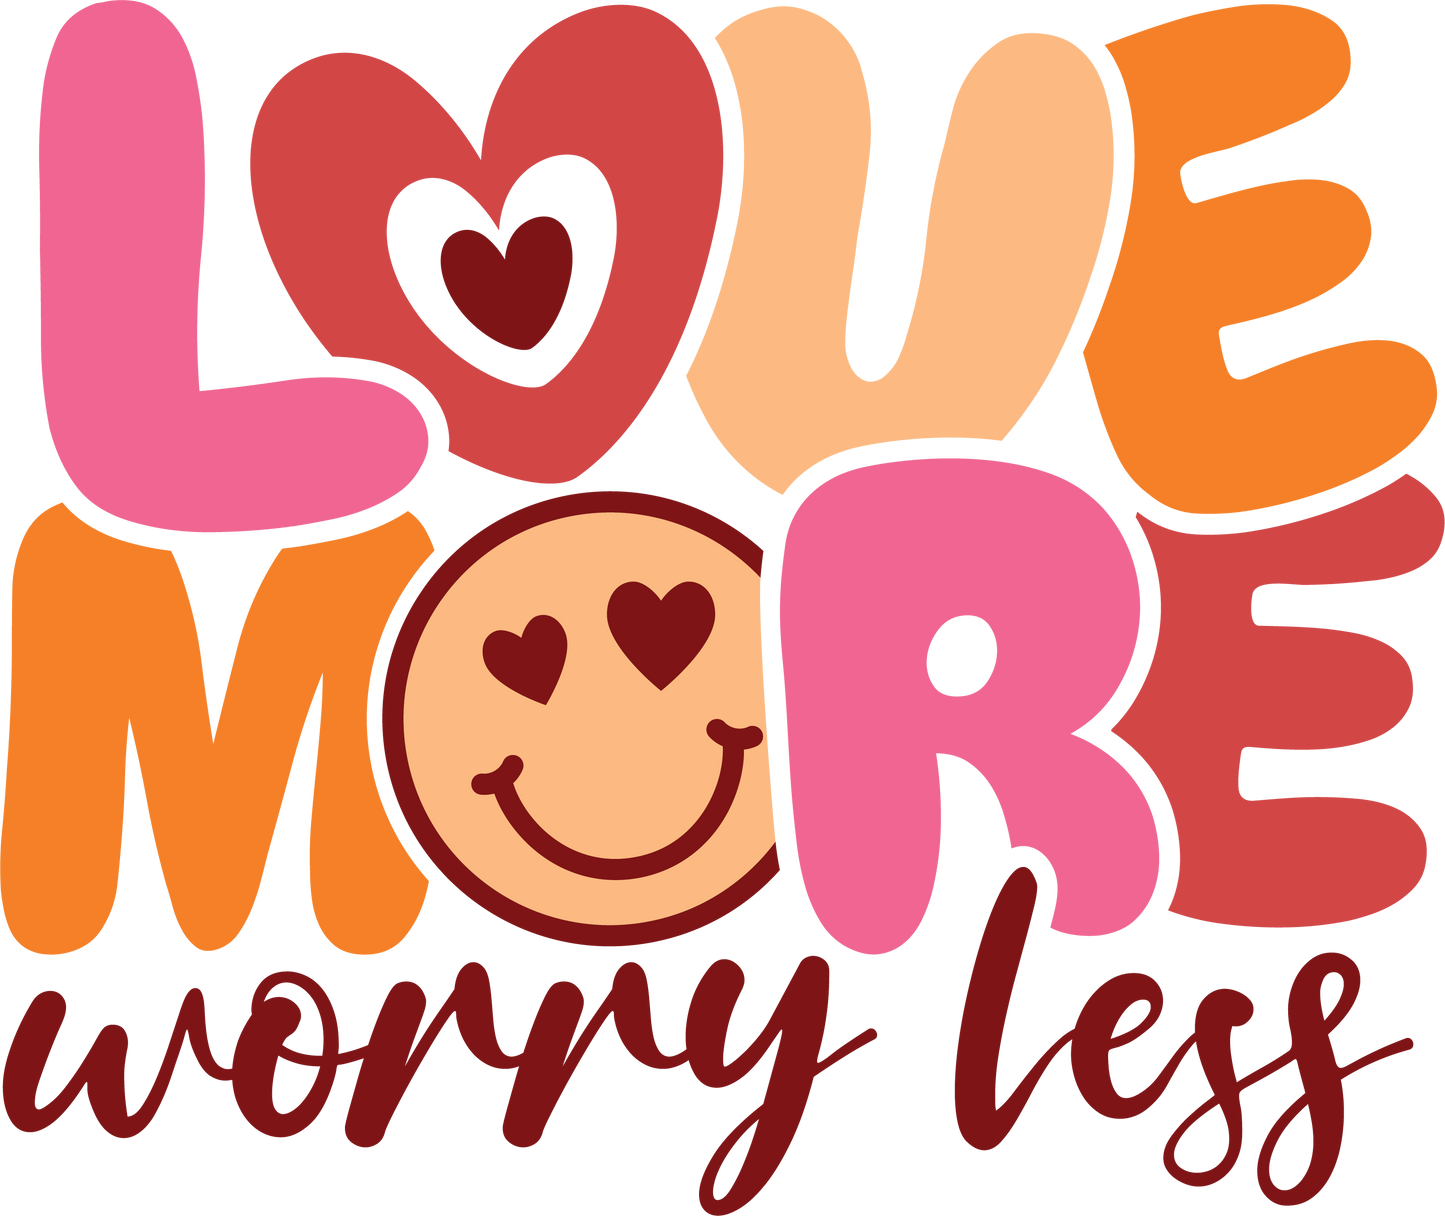 Love More Worry Less - UVDTF decals